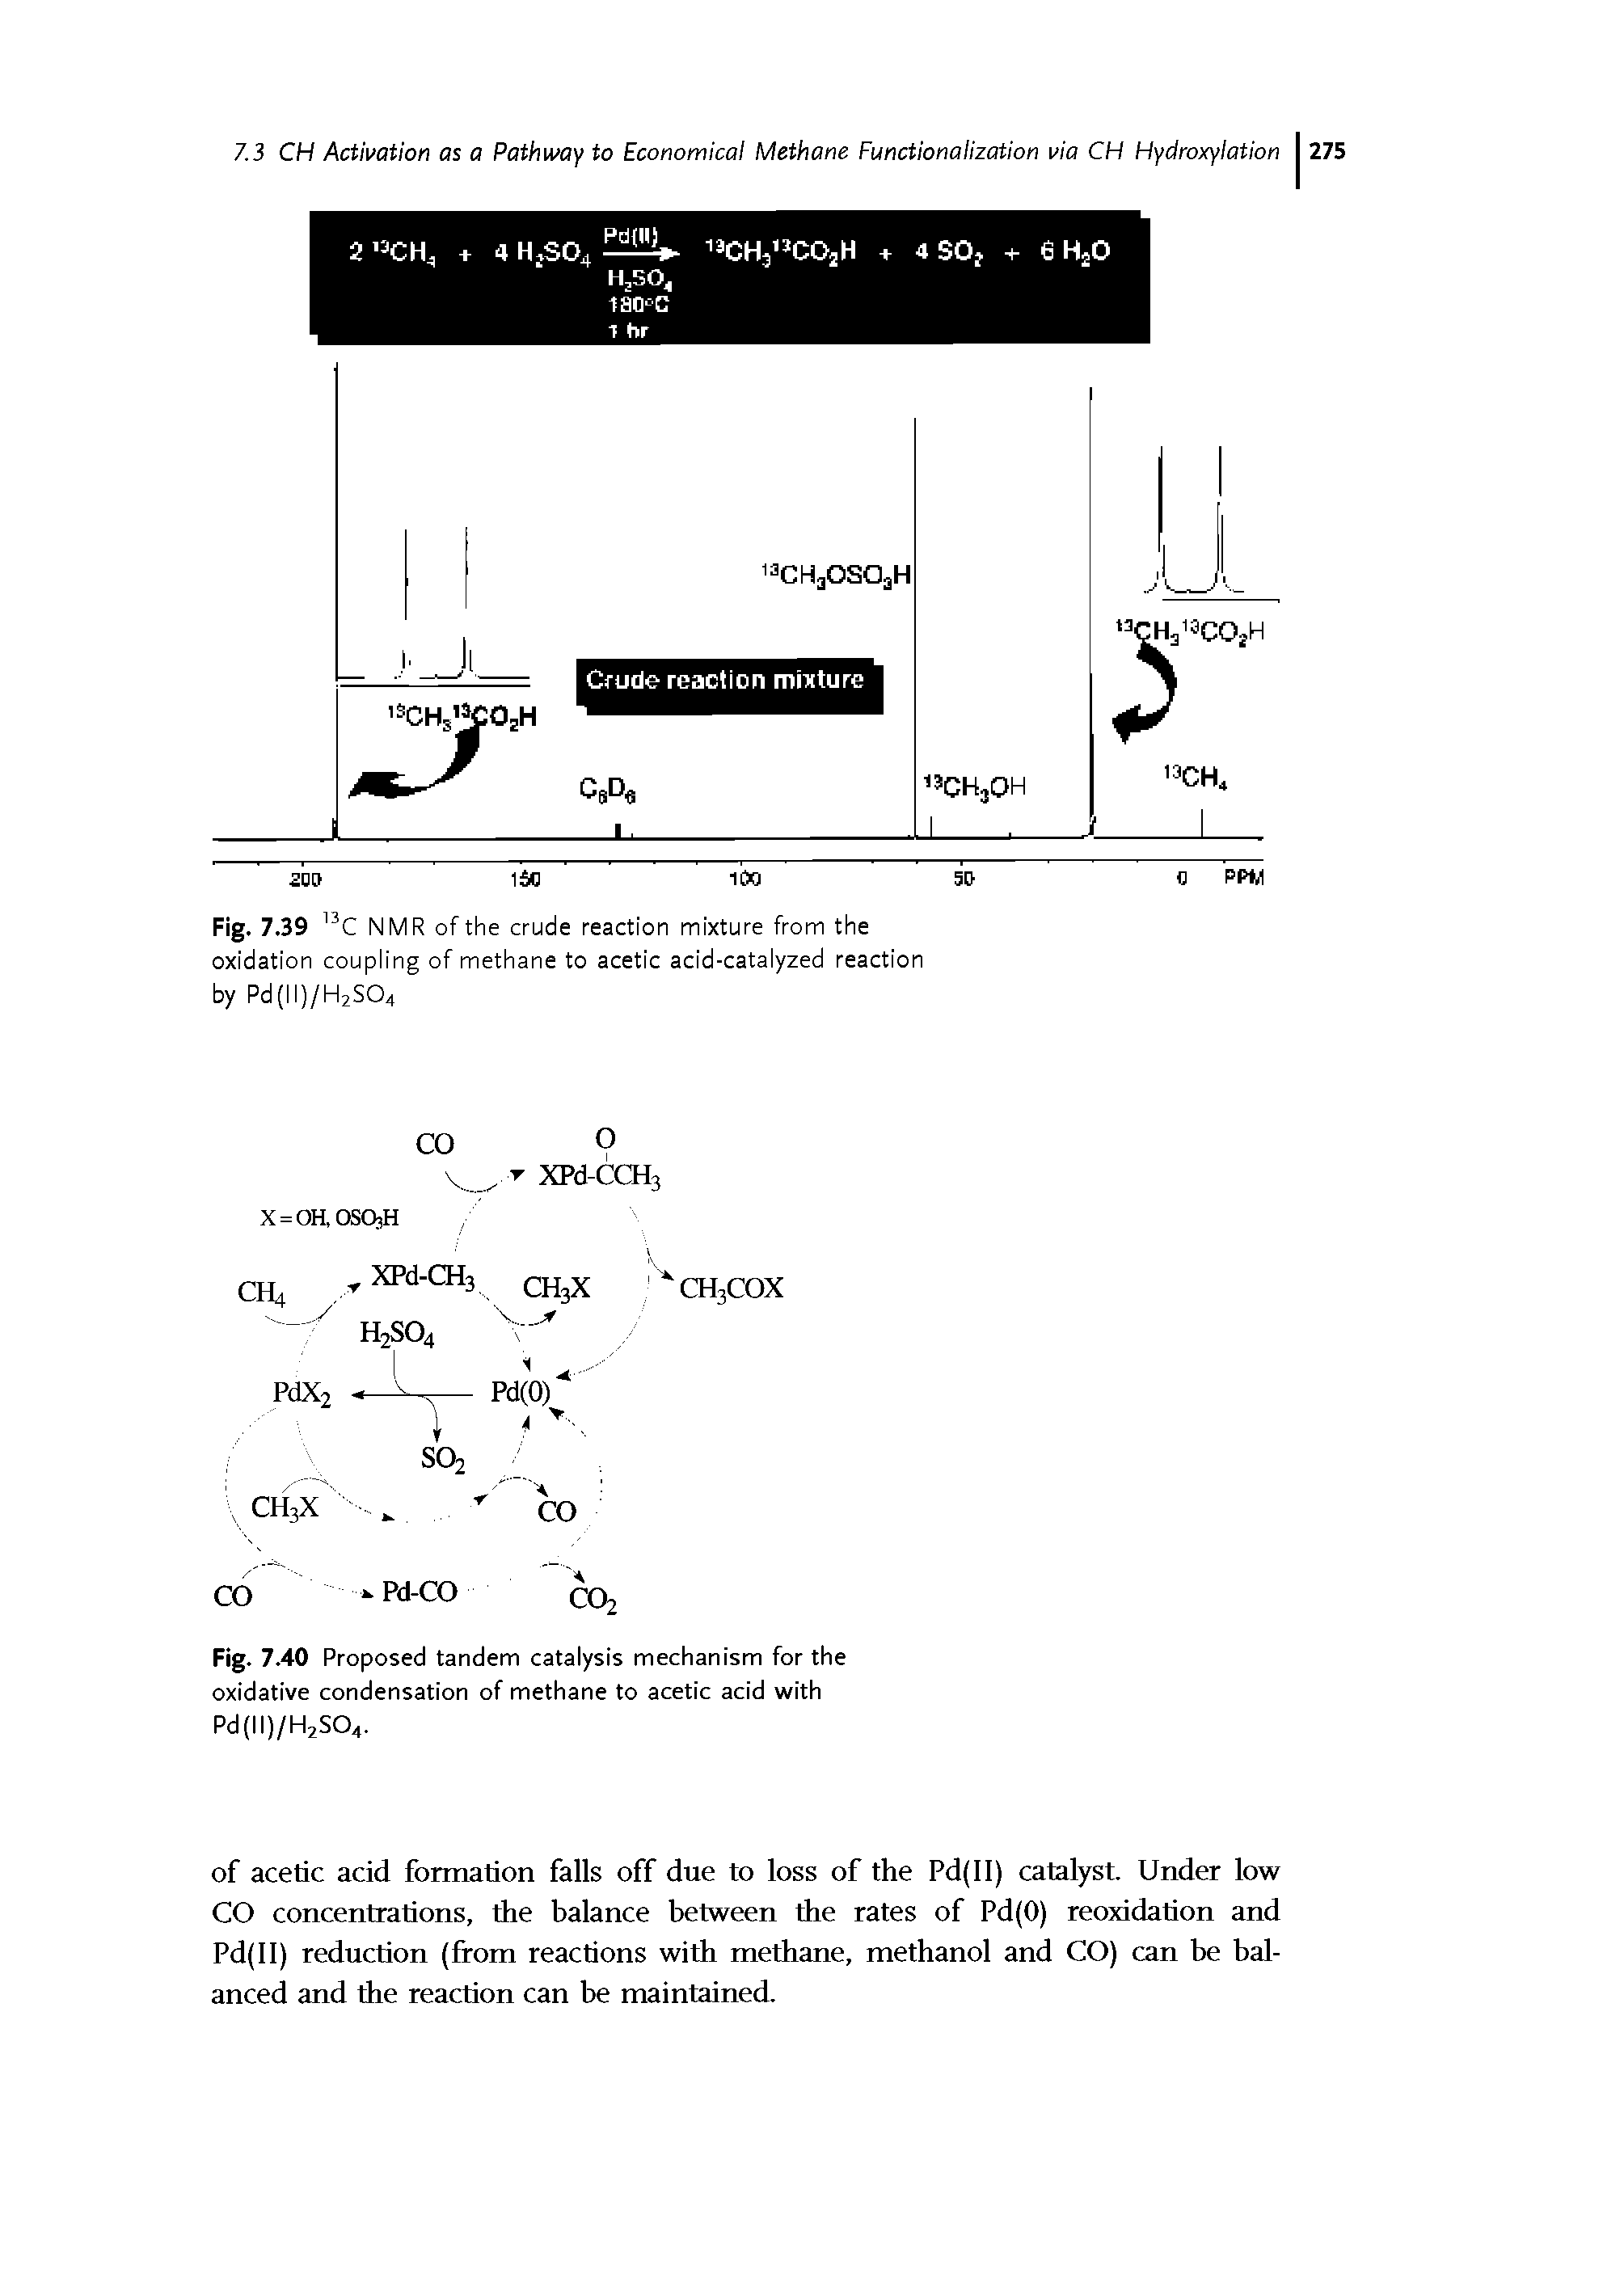 Fig. 7.40 Proposed tandem catalysis mechanism for the oxidative condensation of methane to acetic acid with Pd(ll)/H2S04.